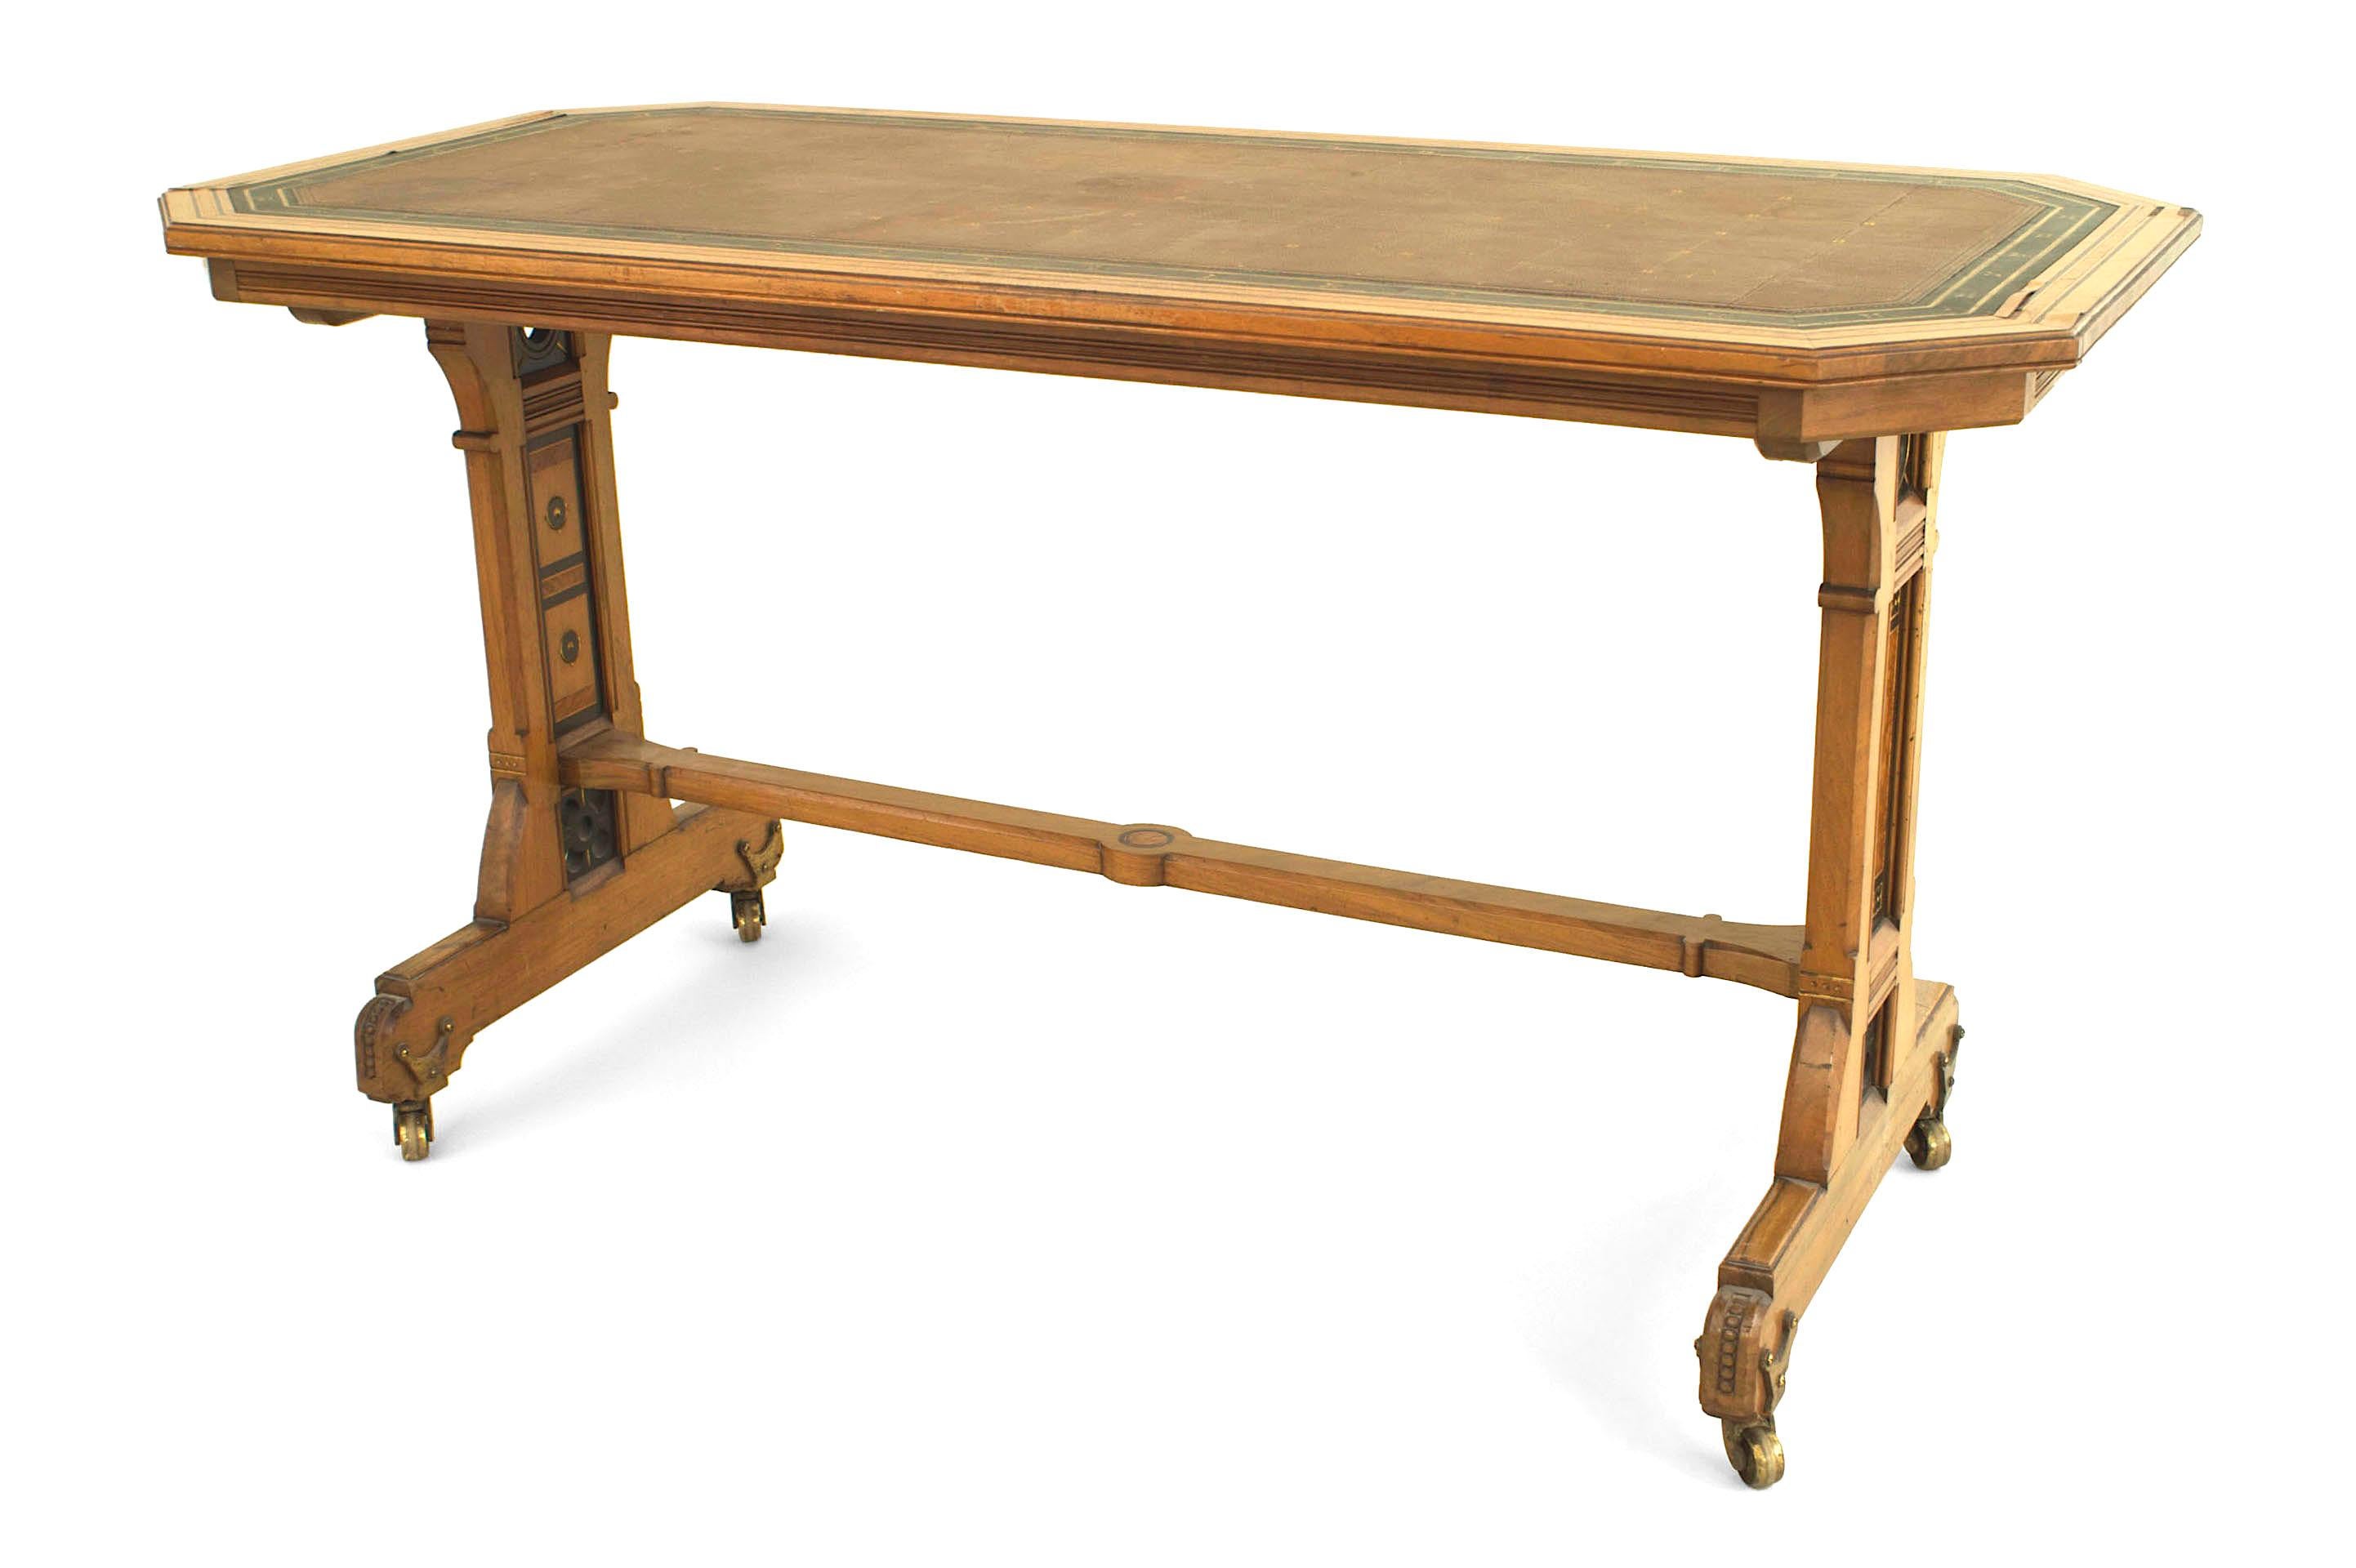 English Arts & Crafts (Aesthetic Movement) double pedestal table elm and burl wood desk with a canted corner top having multi-wood inlay and a green & brown leather writing surface.
    